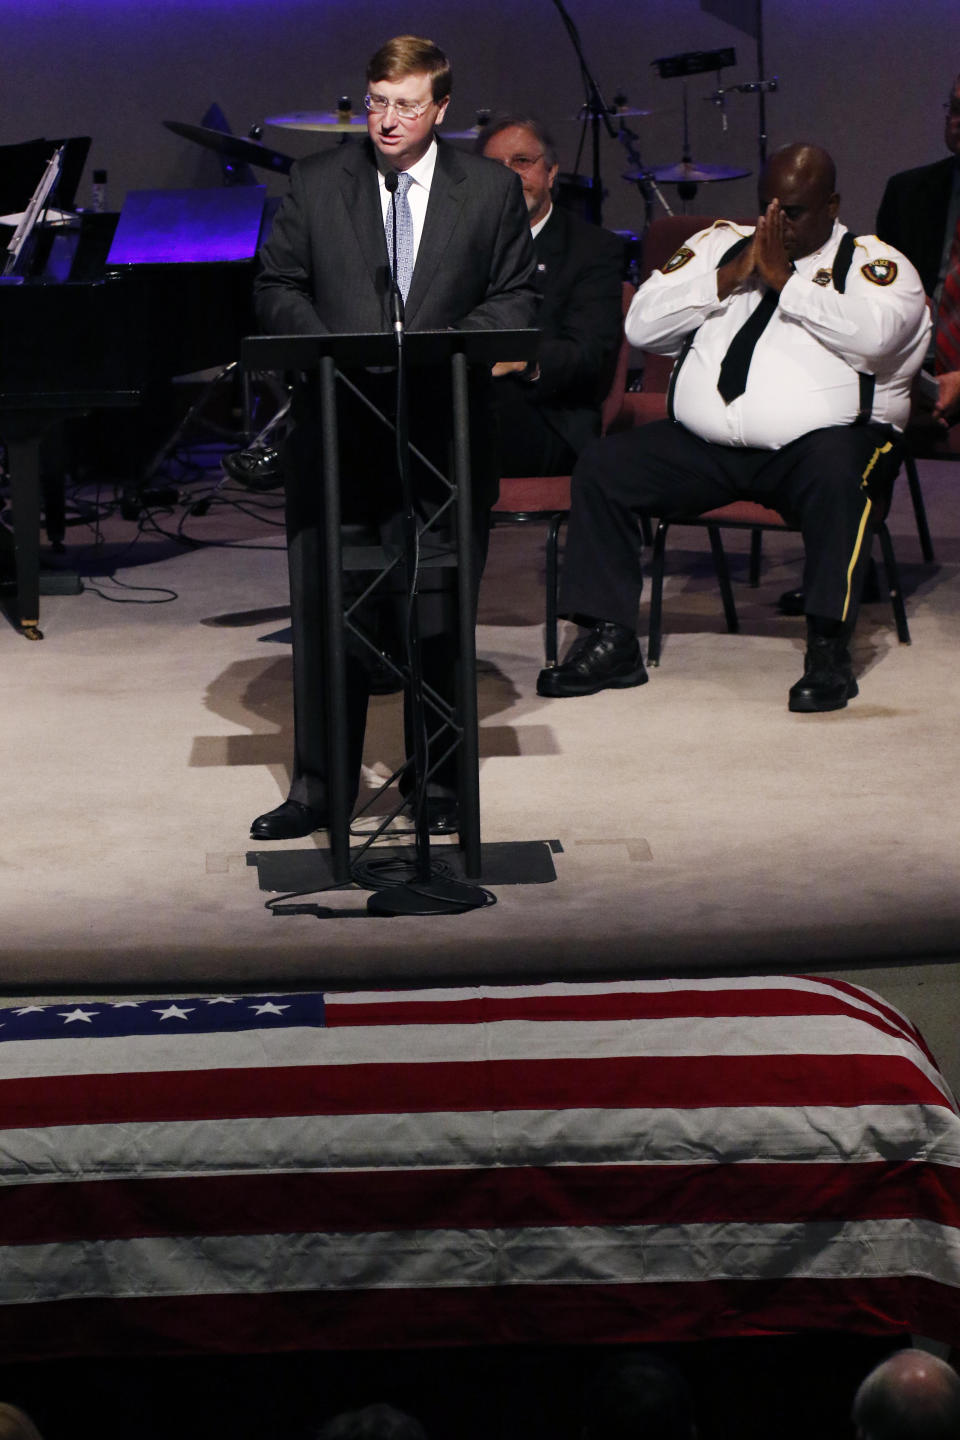 Lt. Gov. Tate Reeves, speaking on behalf of Gov. Phil Bryant and the state of Mississippi, extends his condolences to the family during funeral services Thursday, Oct. 4, 2018, for Brookhaven Police Corporal Zach Moak at Easthaven Baptist Church in Brookhaven, Miss. Moak and officer James White were killed early Saturday, Sept. 30, responding to a call. (AP Photo/Rogelio V. Solis)